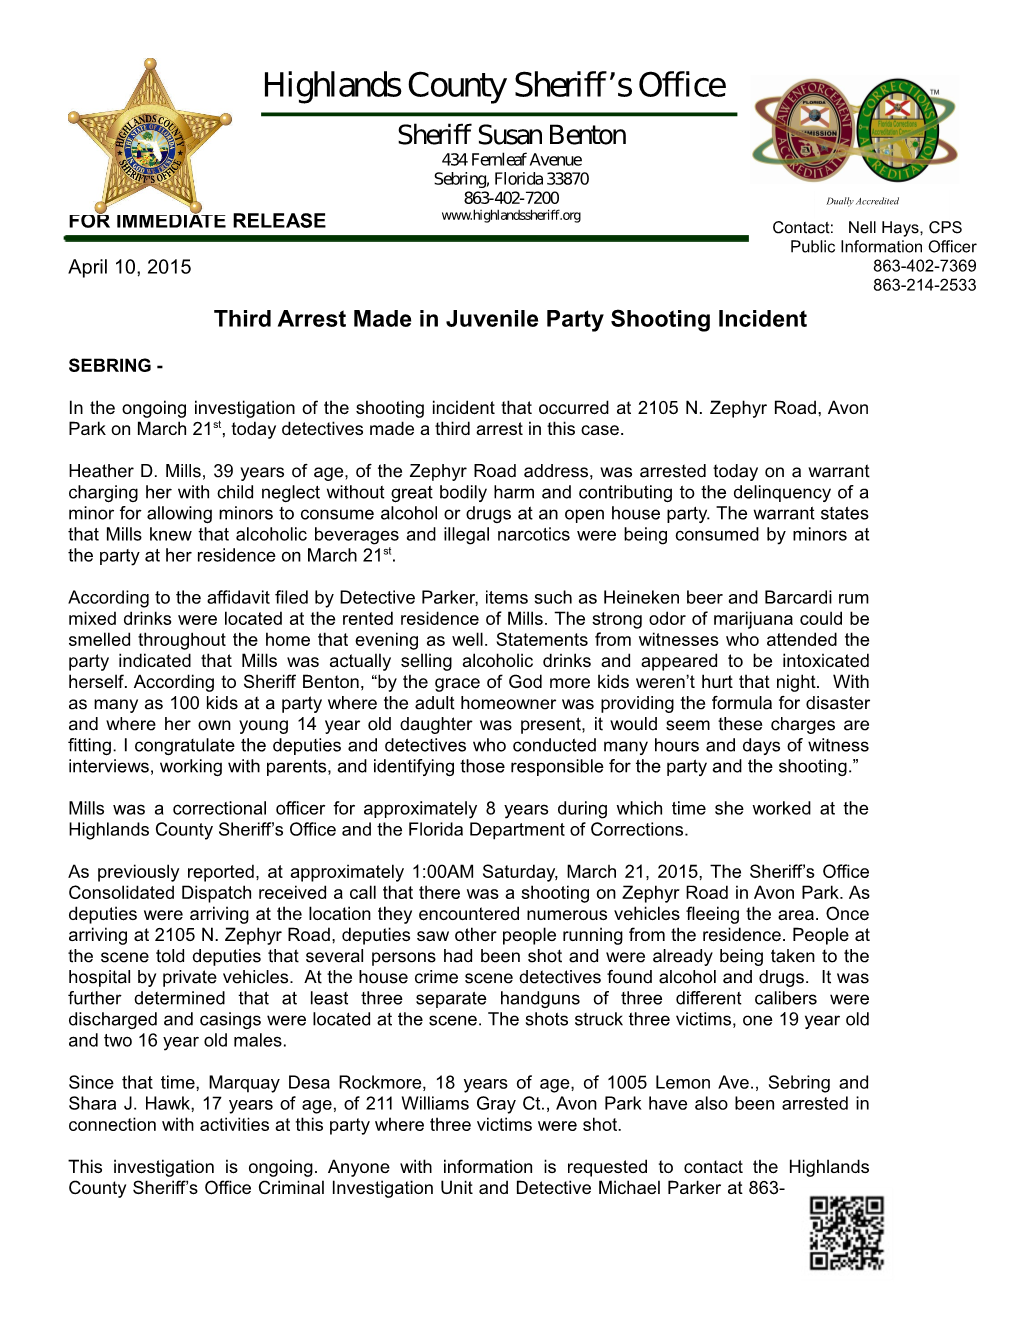 Third Arrest Made in Juvenile Party Shooting Incident